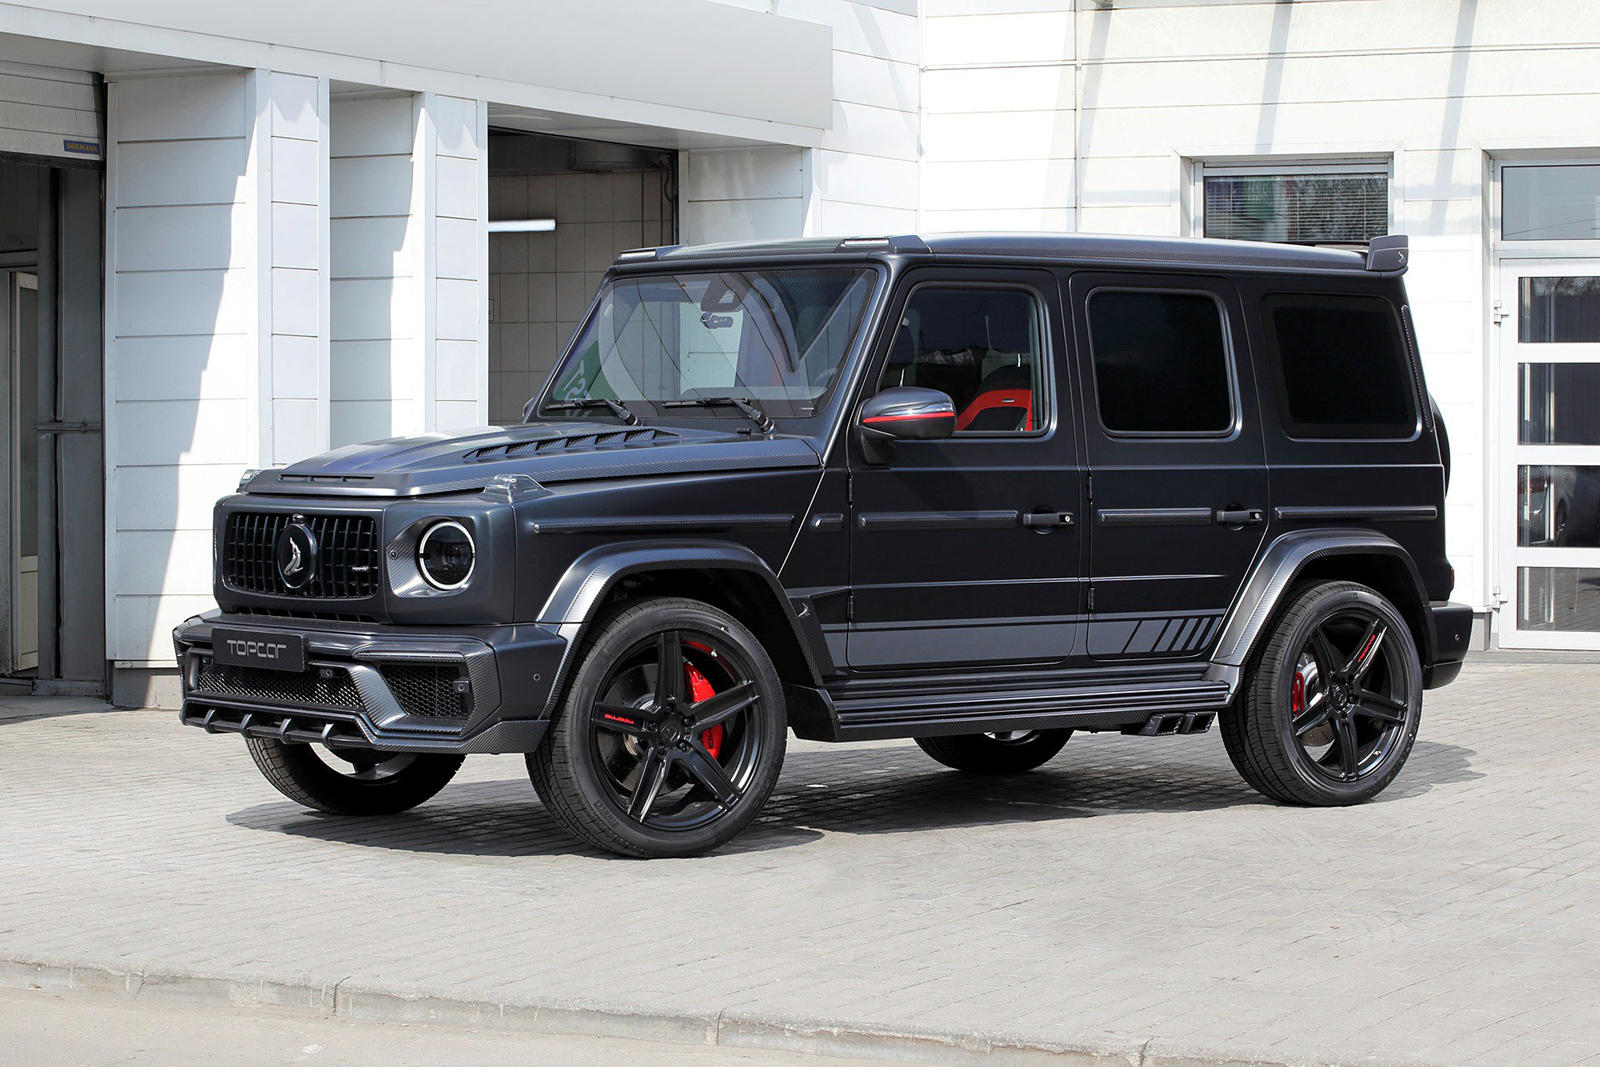 Another Mercedes Amg G Turns To The Dark Side With Inferno Mod